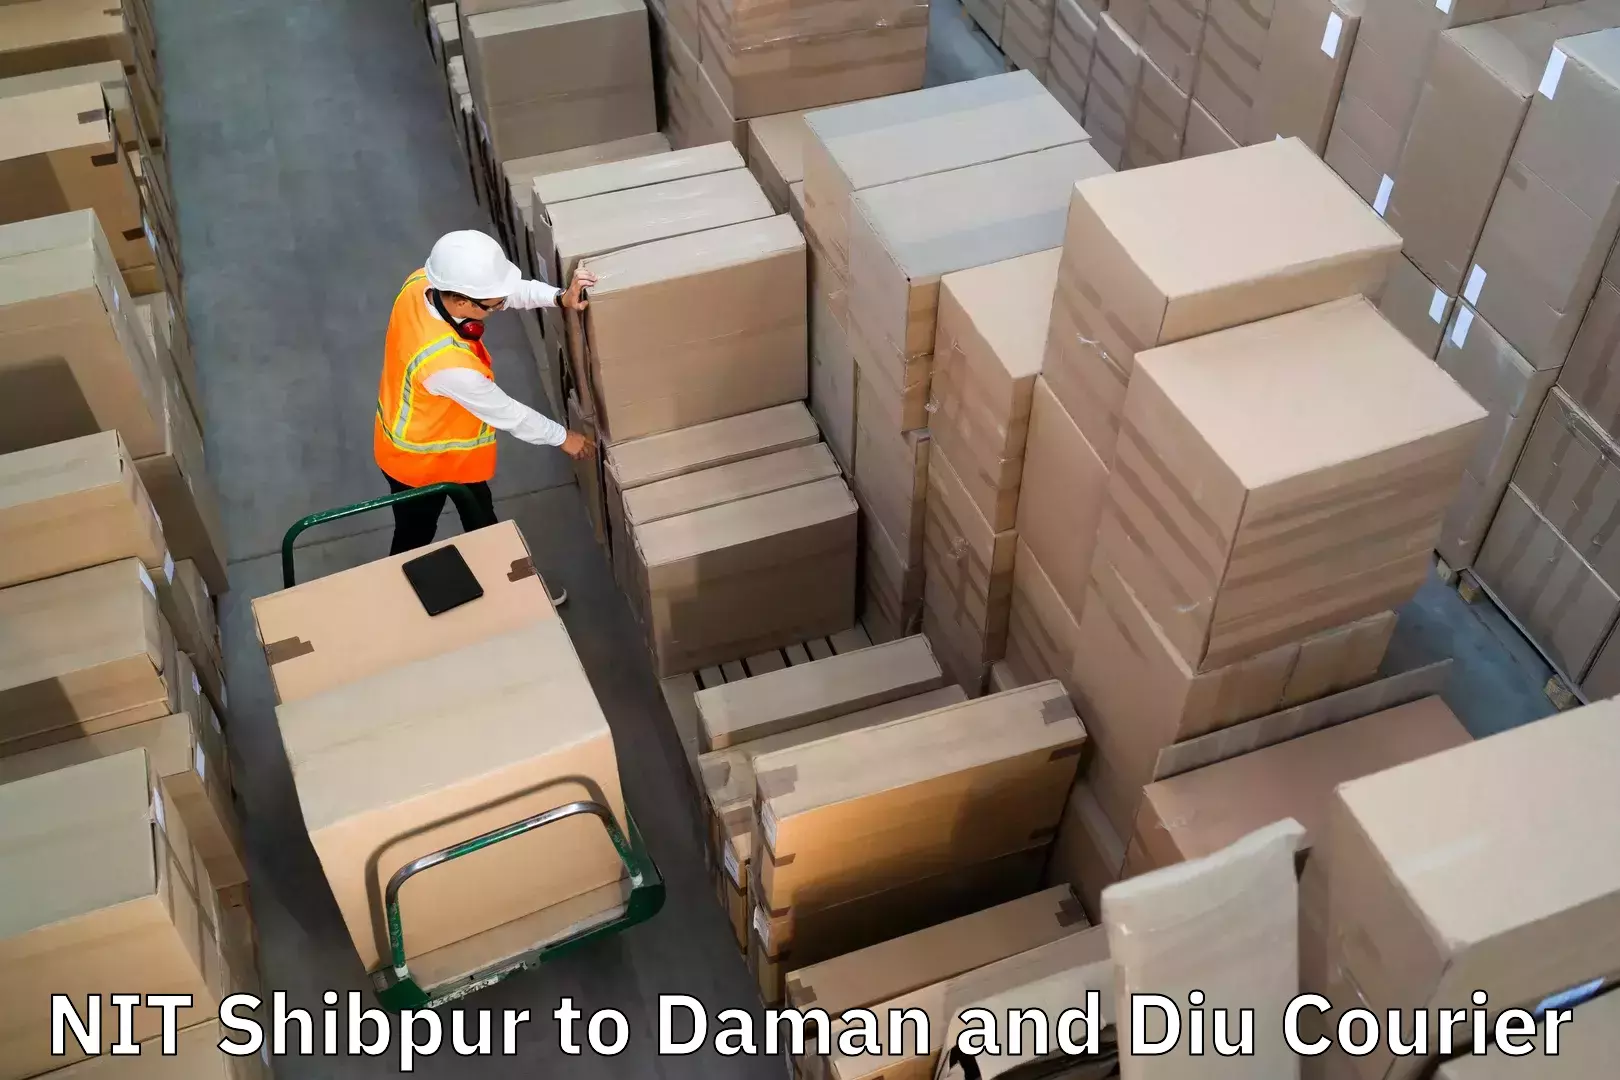 Luggage transport consultancy NIT Shibpur to Daman and Diu